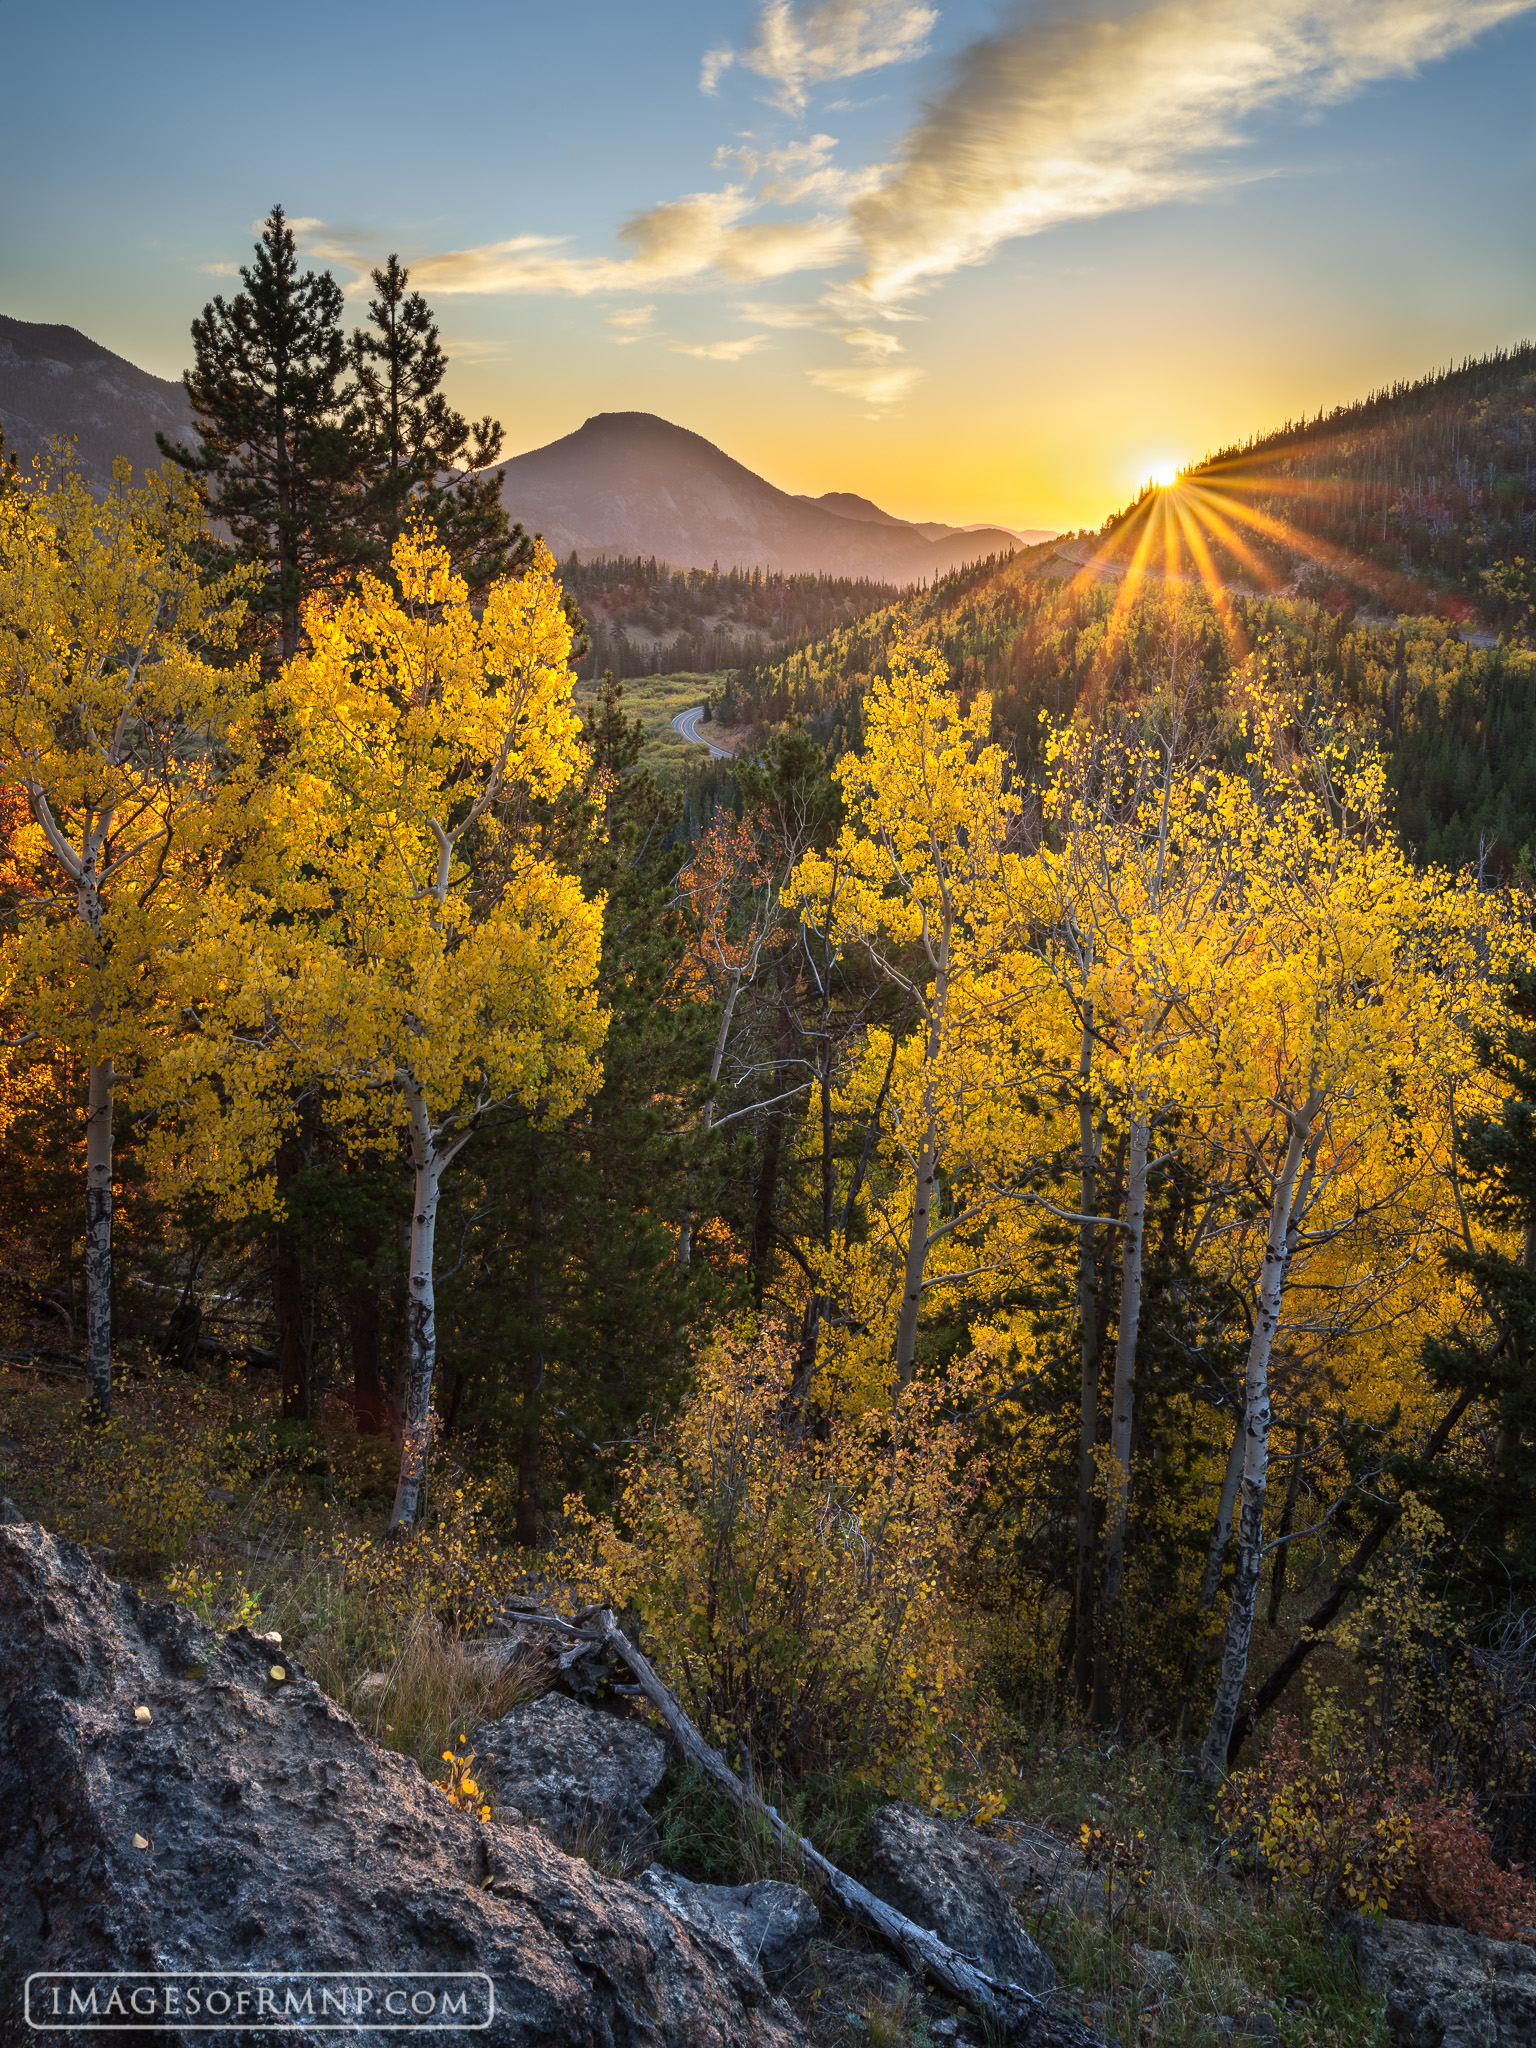 As the rising sun crests the ridgeline, the golden aspen leaves glow brightly welcoming this new day in Rocky Mountain National...